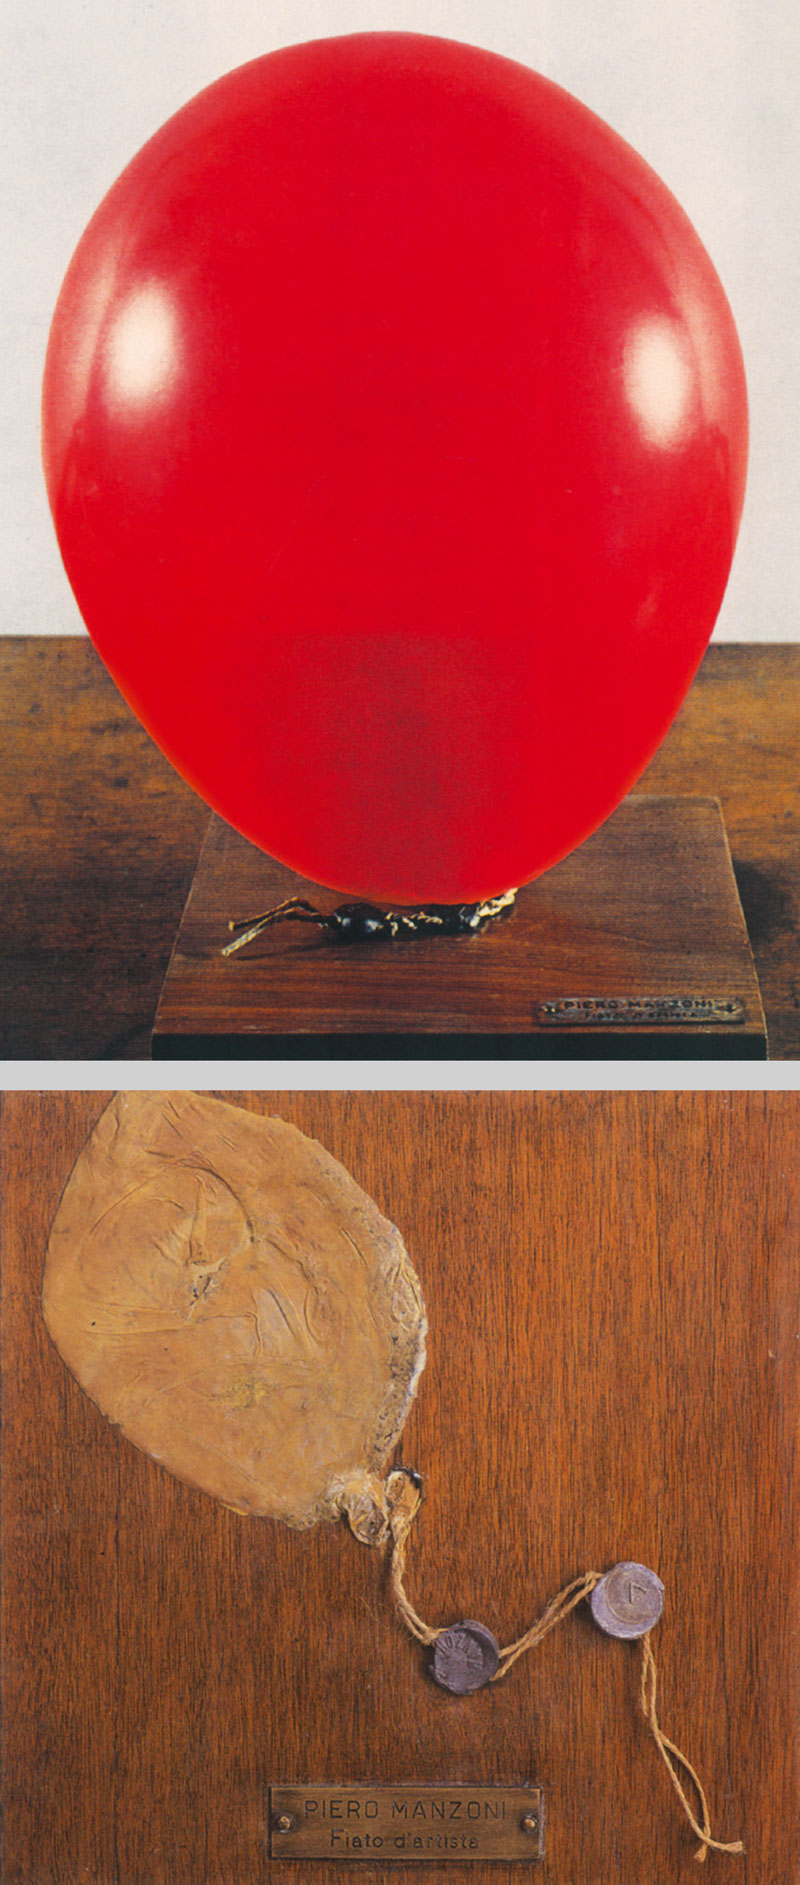 Two images of Piero Manzoni’s conceptual work “Fiato d’artista” (1960). The first is “happy”, showing an inflated balloon, and the second is “sad,” showing a deflated balloon.